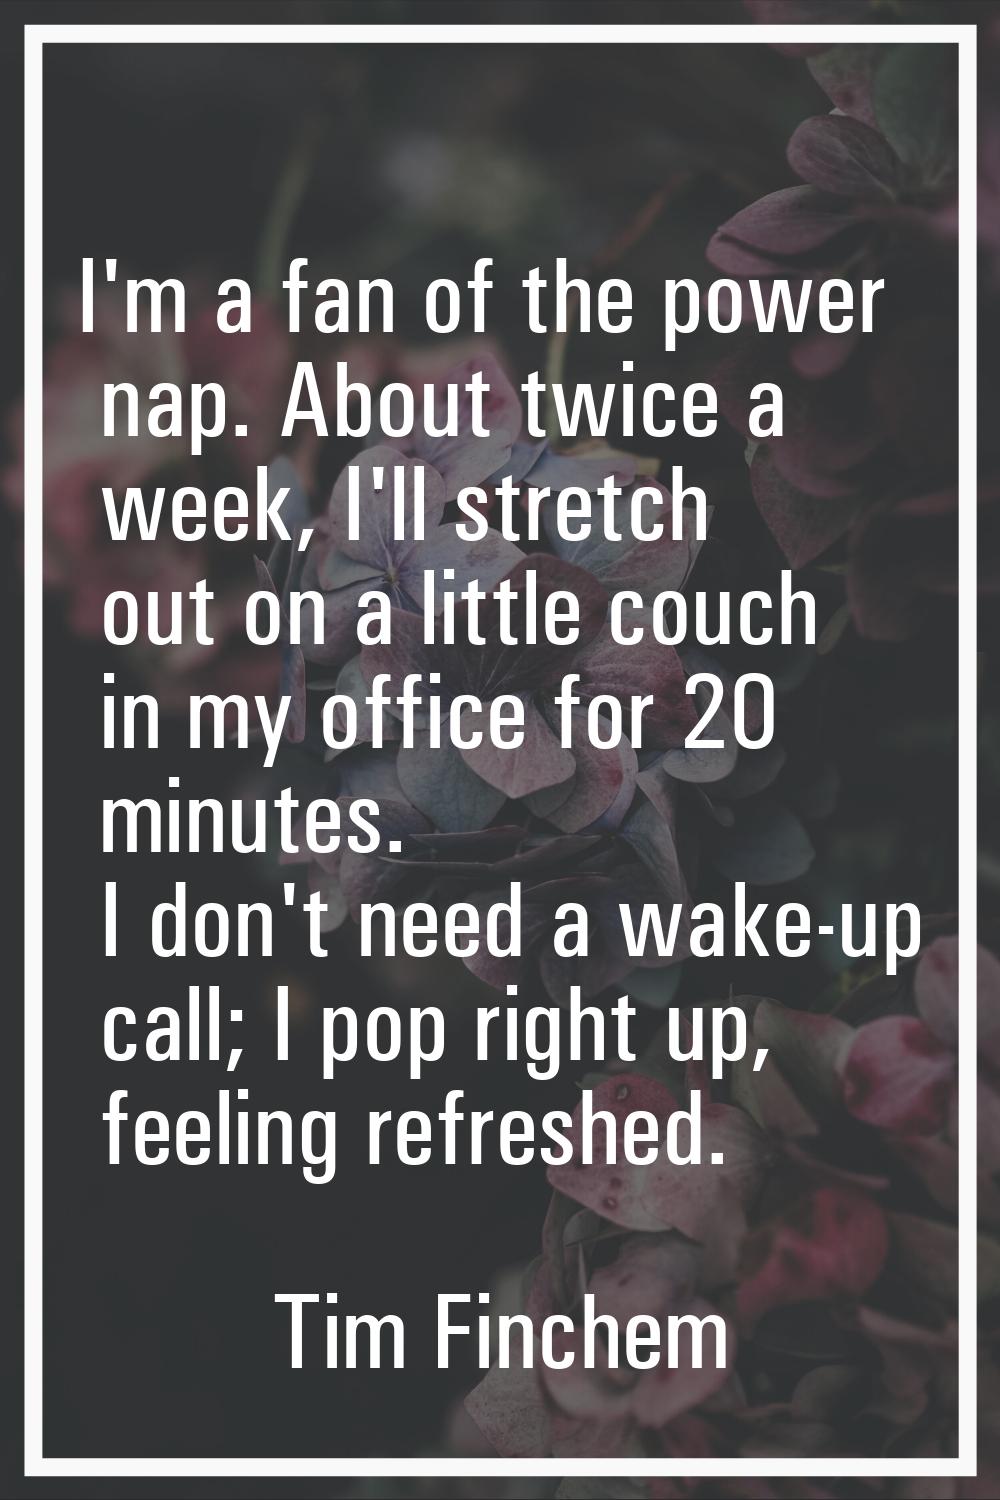 I'm a fan of the power nap. About twice a week, I'll stretch out on a little couch in my office for